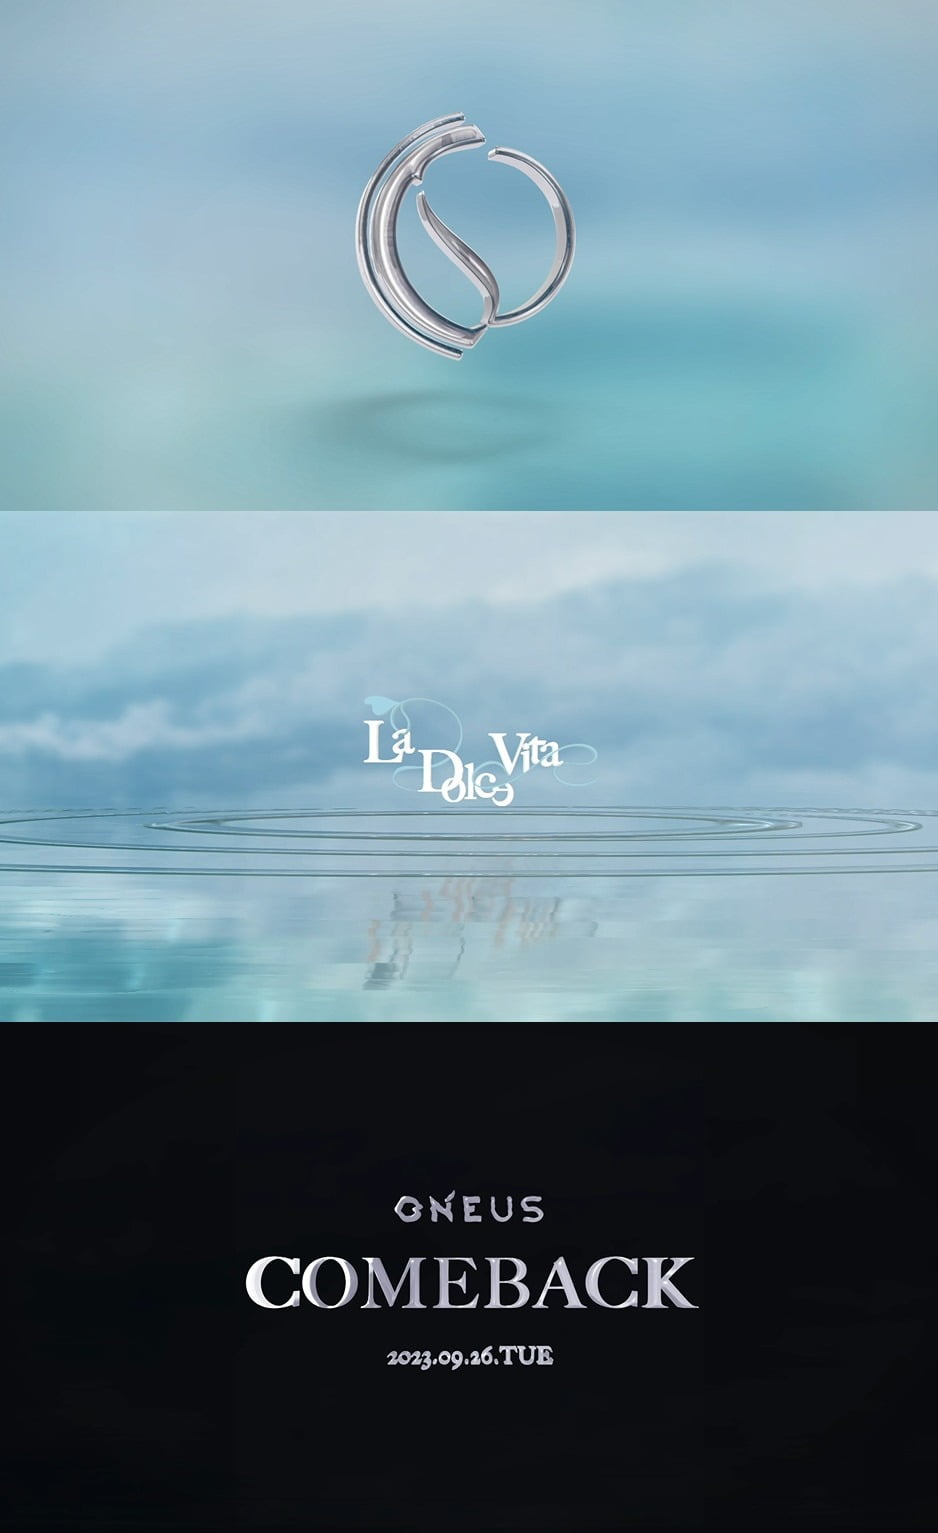 ONEUS will join the comeback competition in September